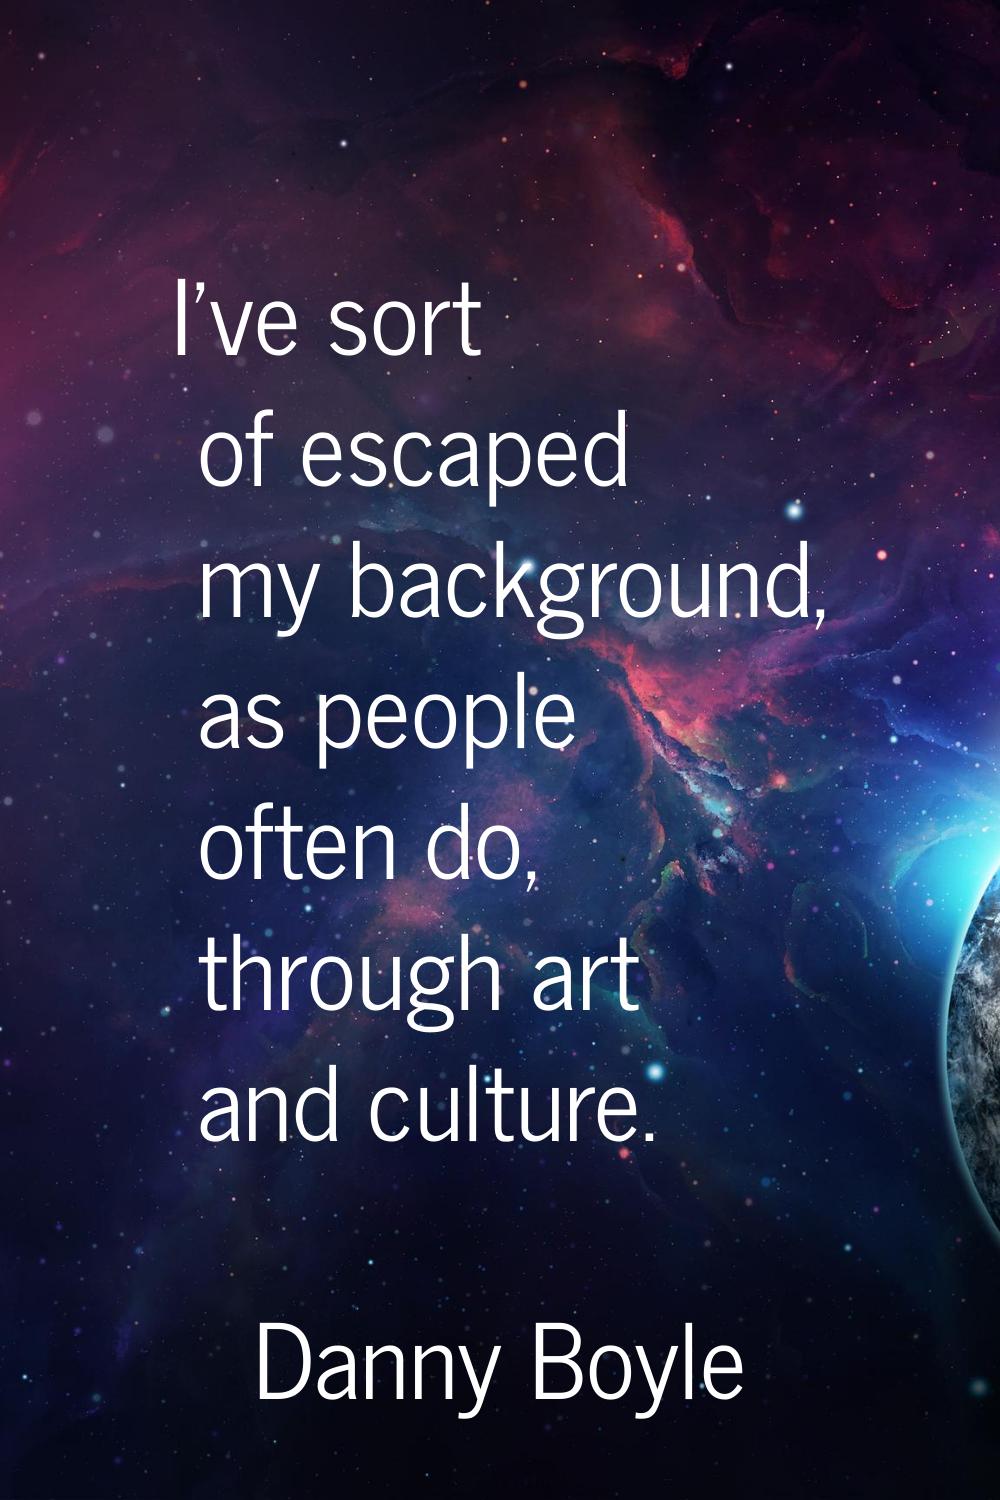 I've sort of escaped my background, as people often do, through art and culture.